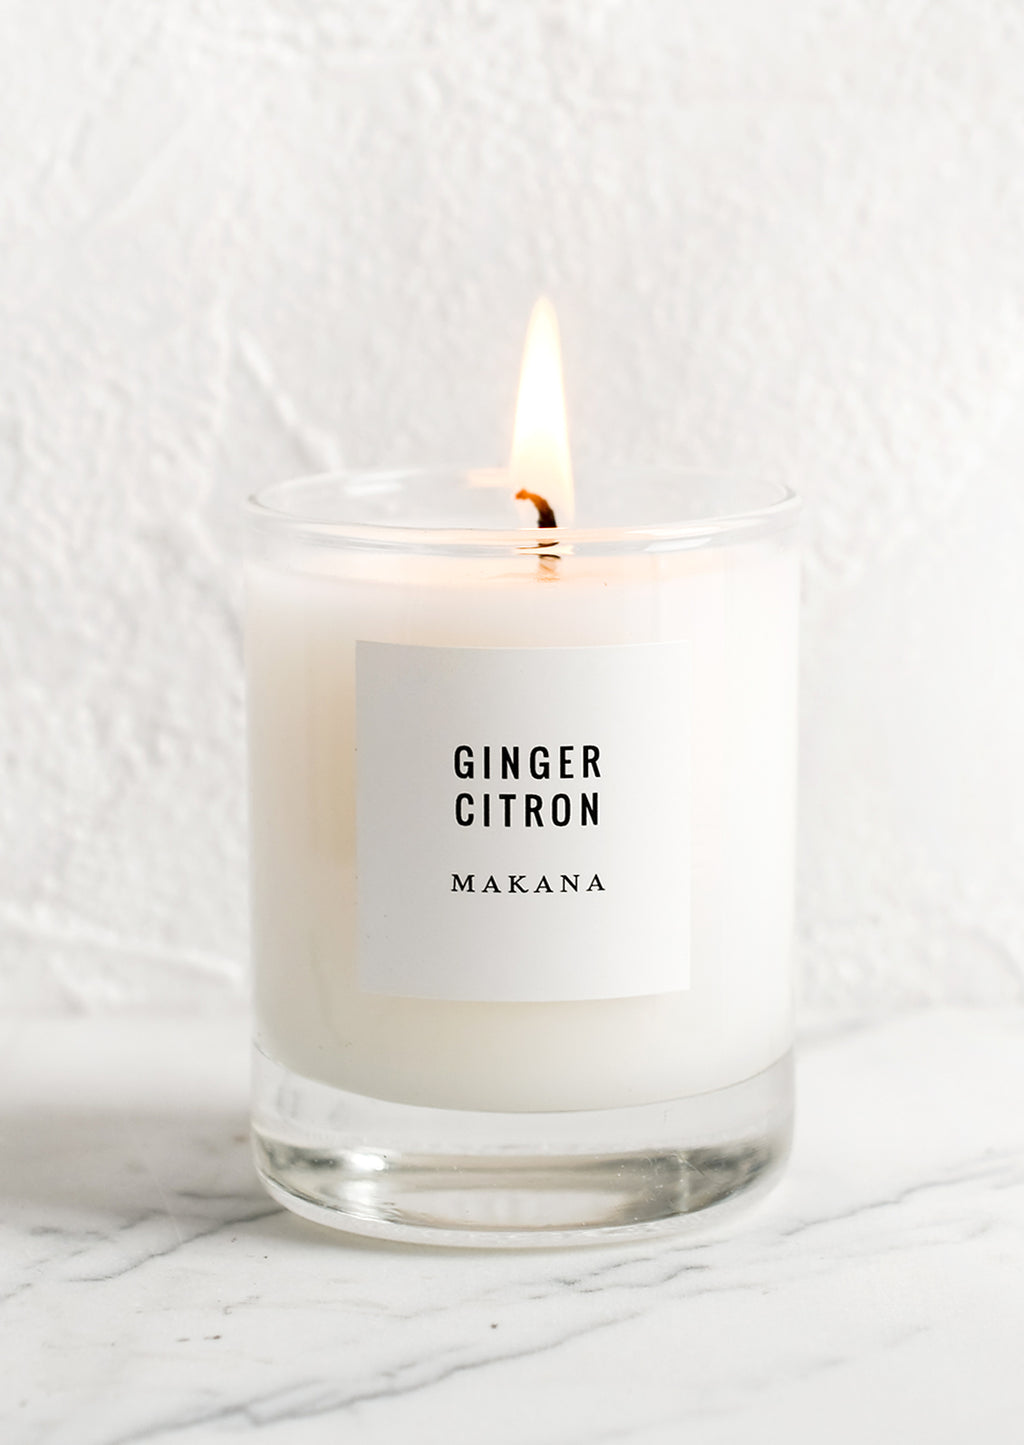 Ginger Citron: A votive candle in glass container.